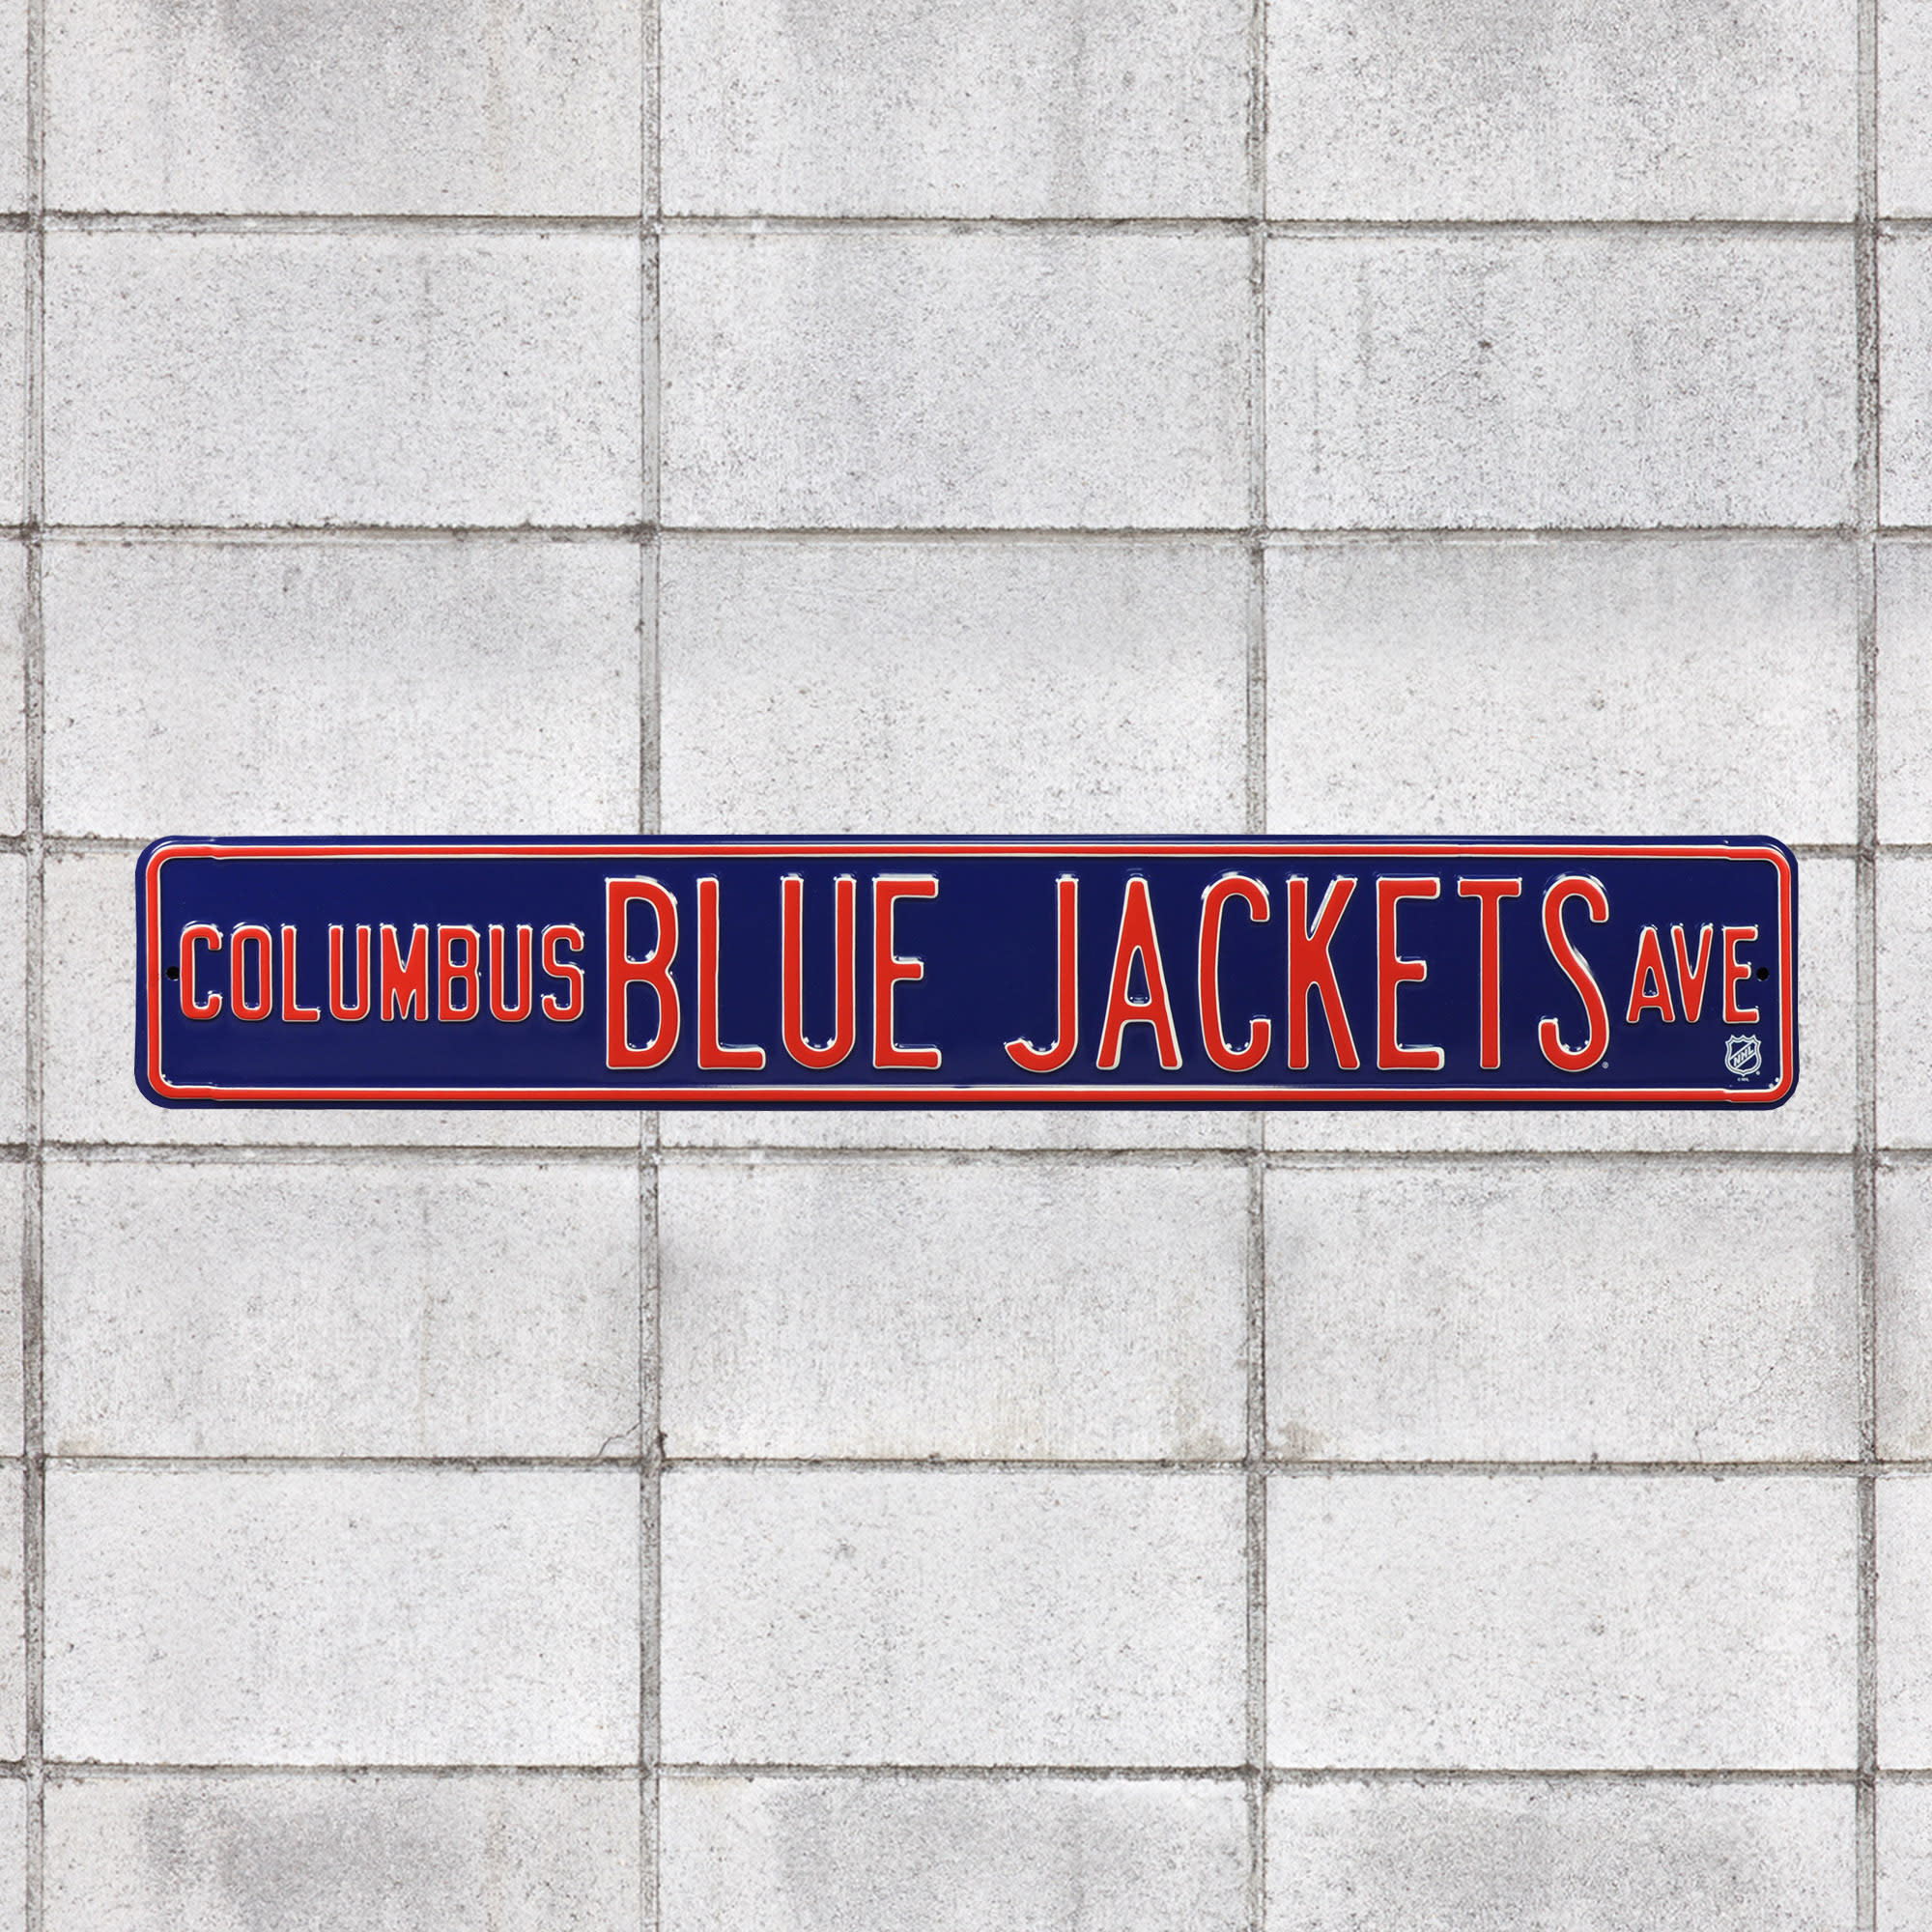 Columbus Blue Jackets: Columbus Blue Jackets Avenue - Officially Licensed NHL Metal Street Sign 36.0"W x 6.0"H by Fathead | 100%